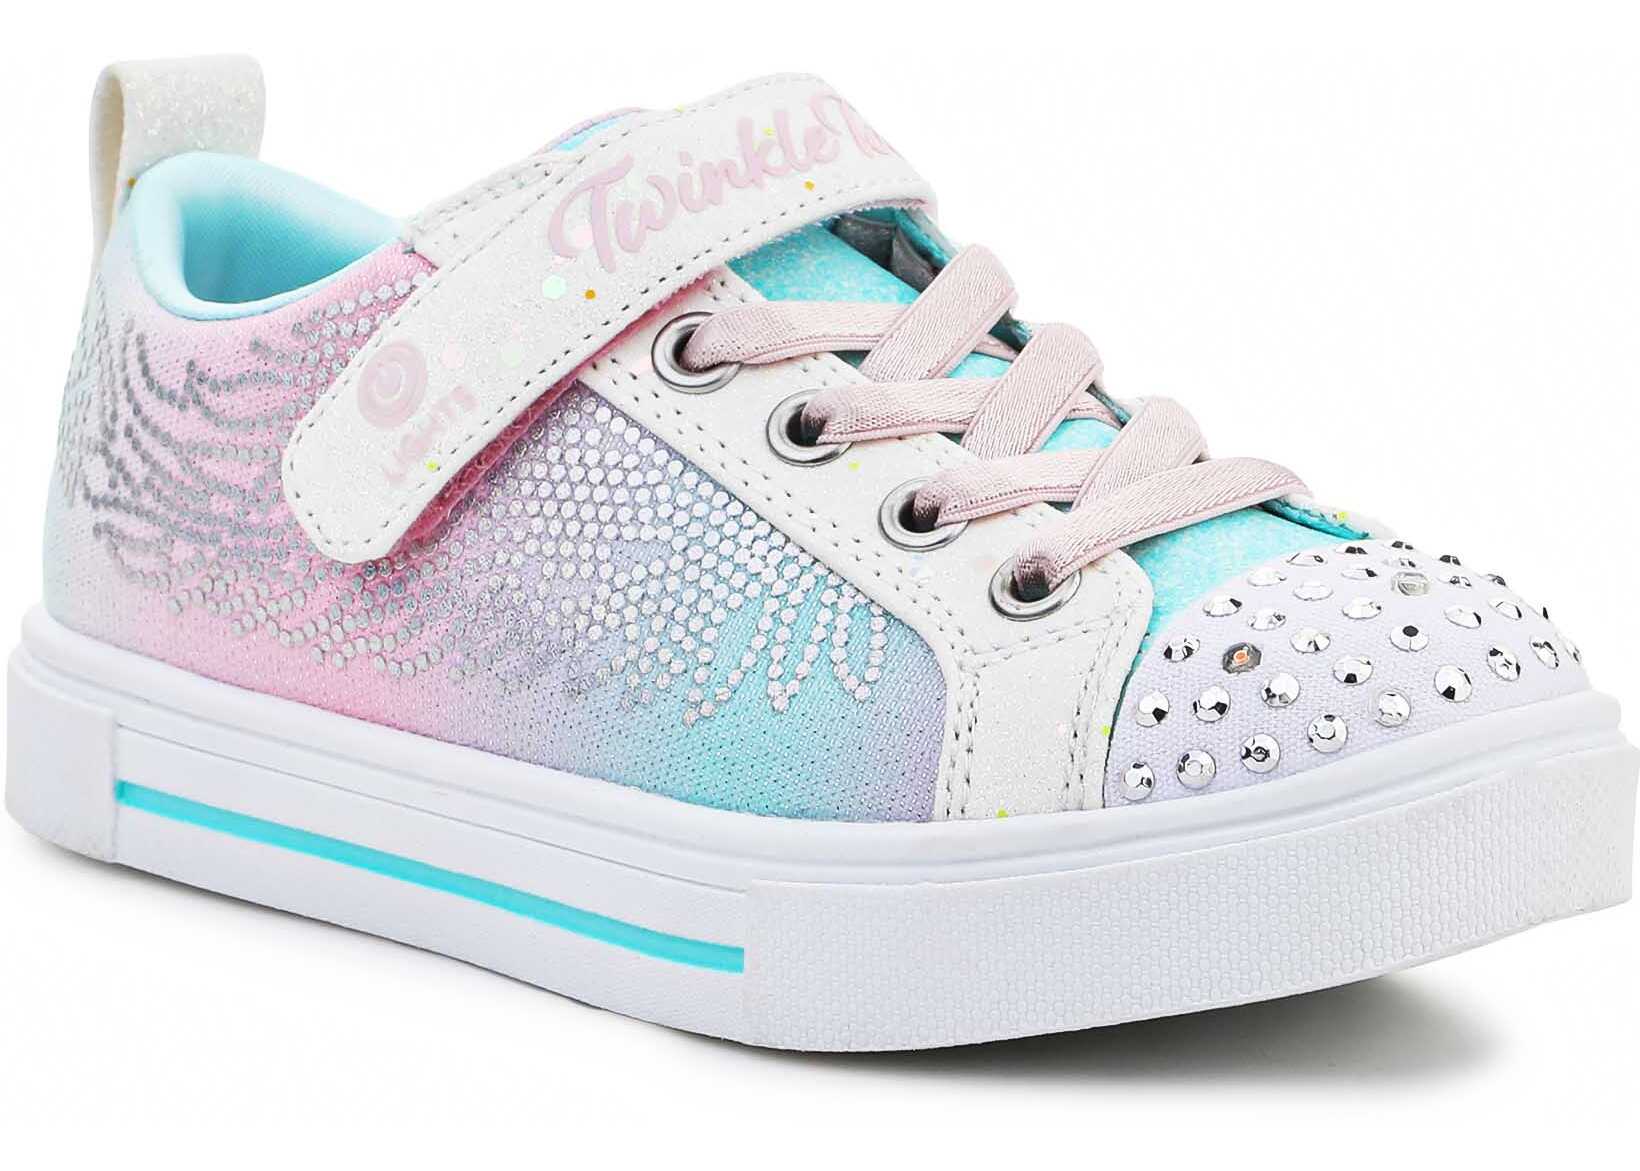 SKECHERS S Lights Twinkle Sparks WINGED MAGIC 314797L - WMLT Blue/Pink/White